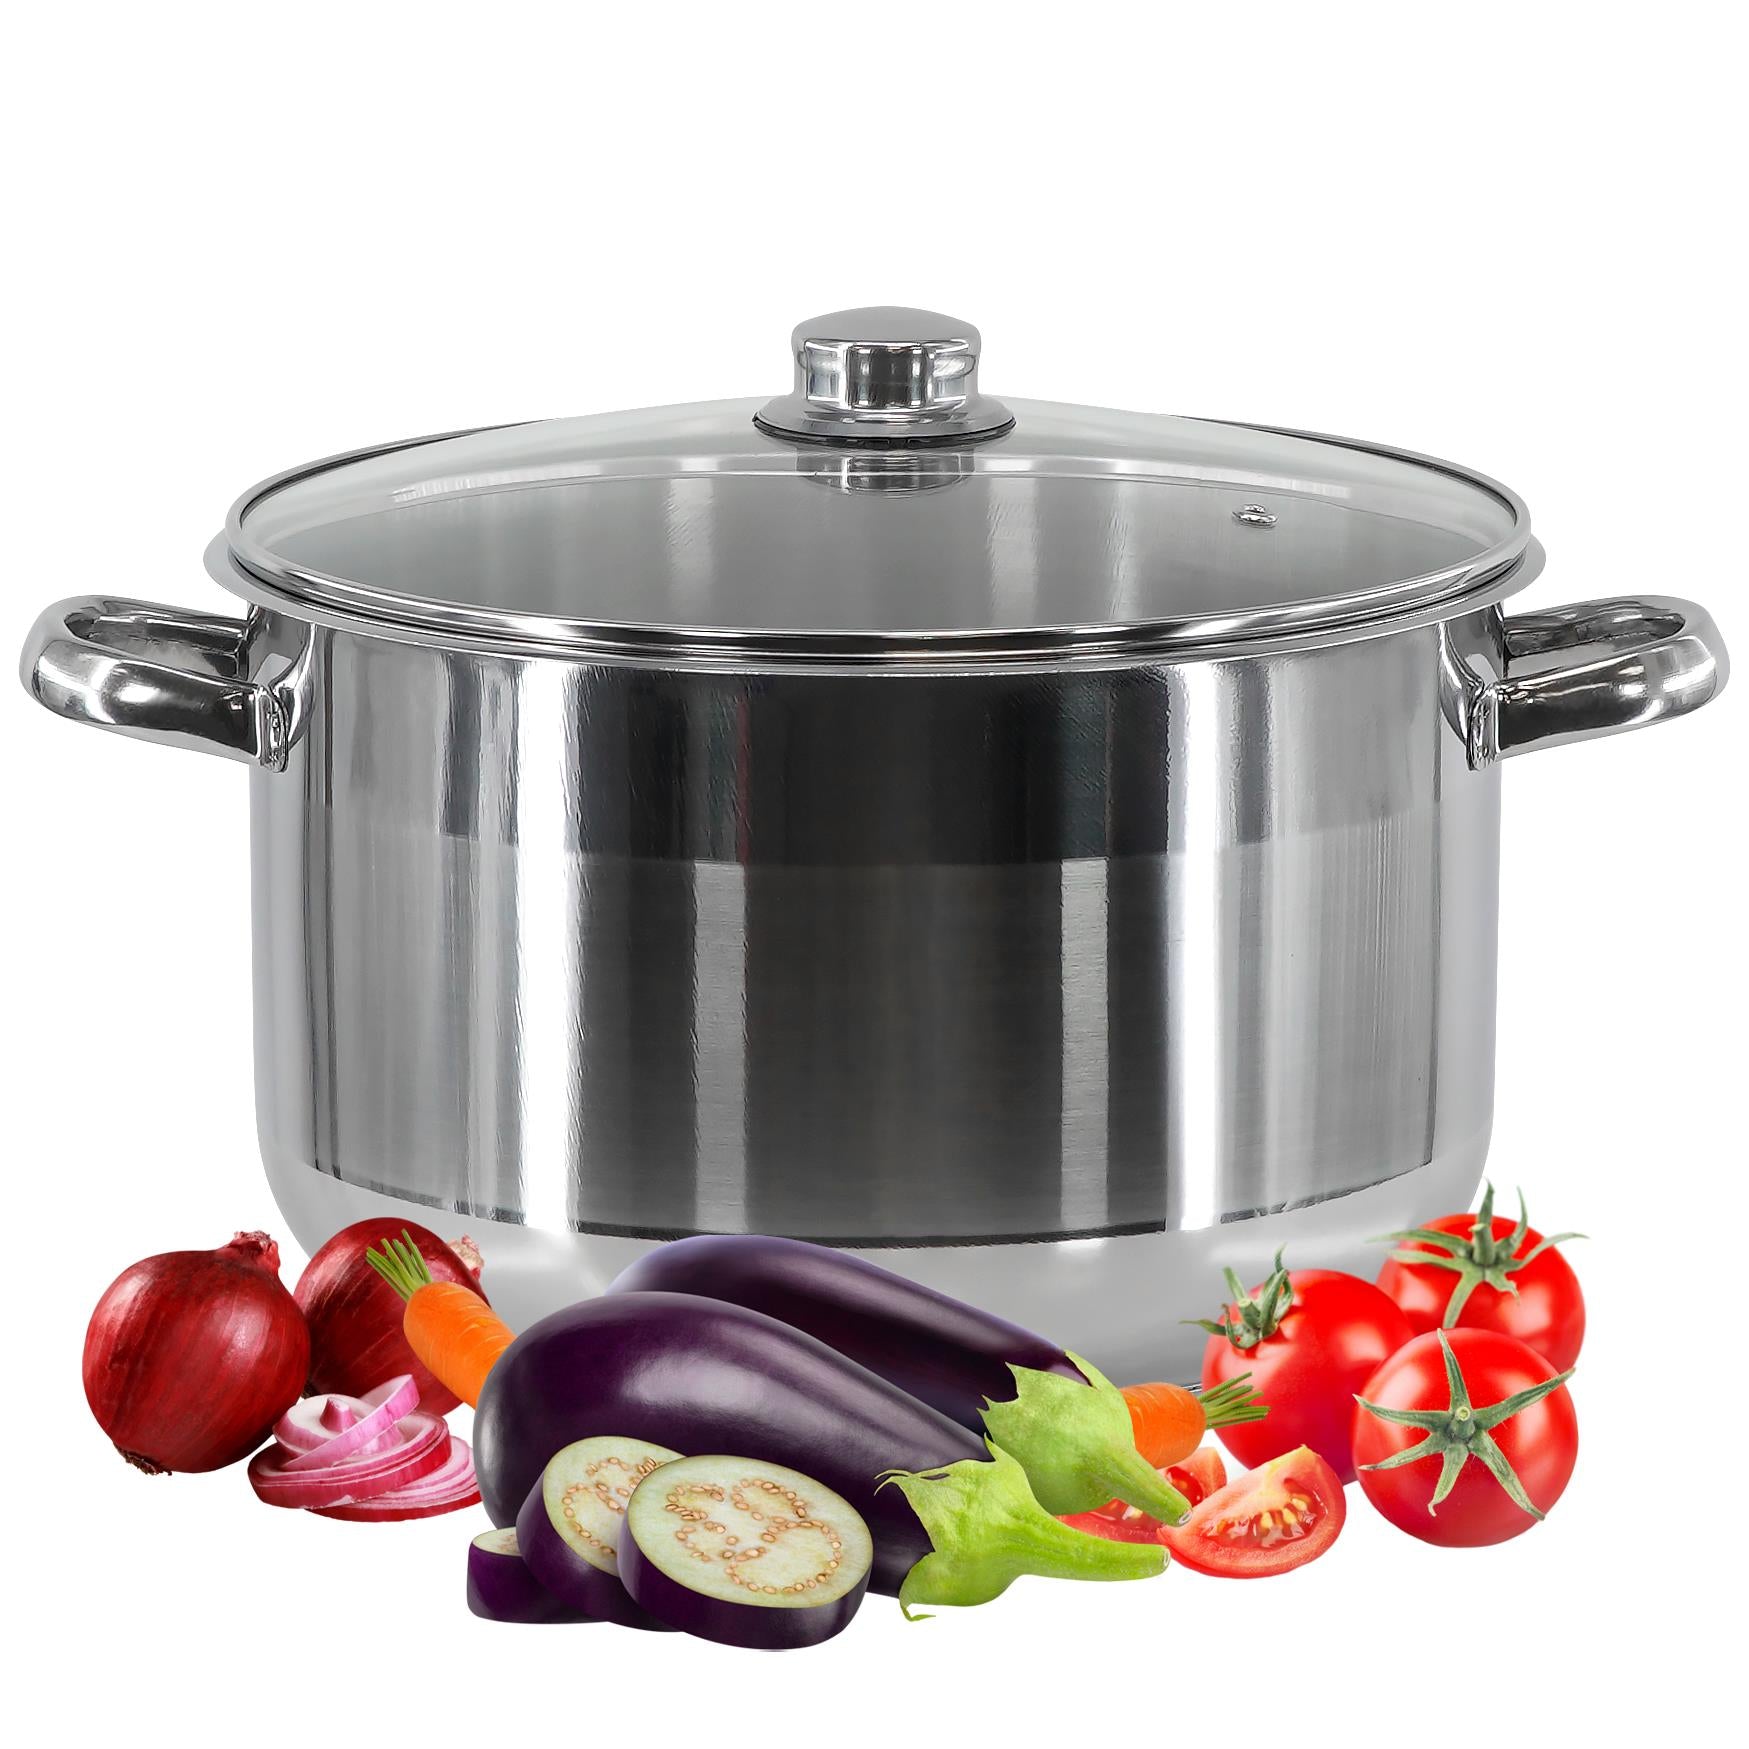 Induction Stockpot With Glass Lid - 11 ltr by GEEZY - UKBuyZone